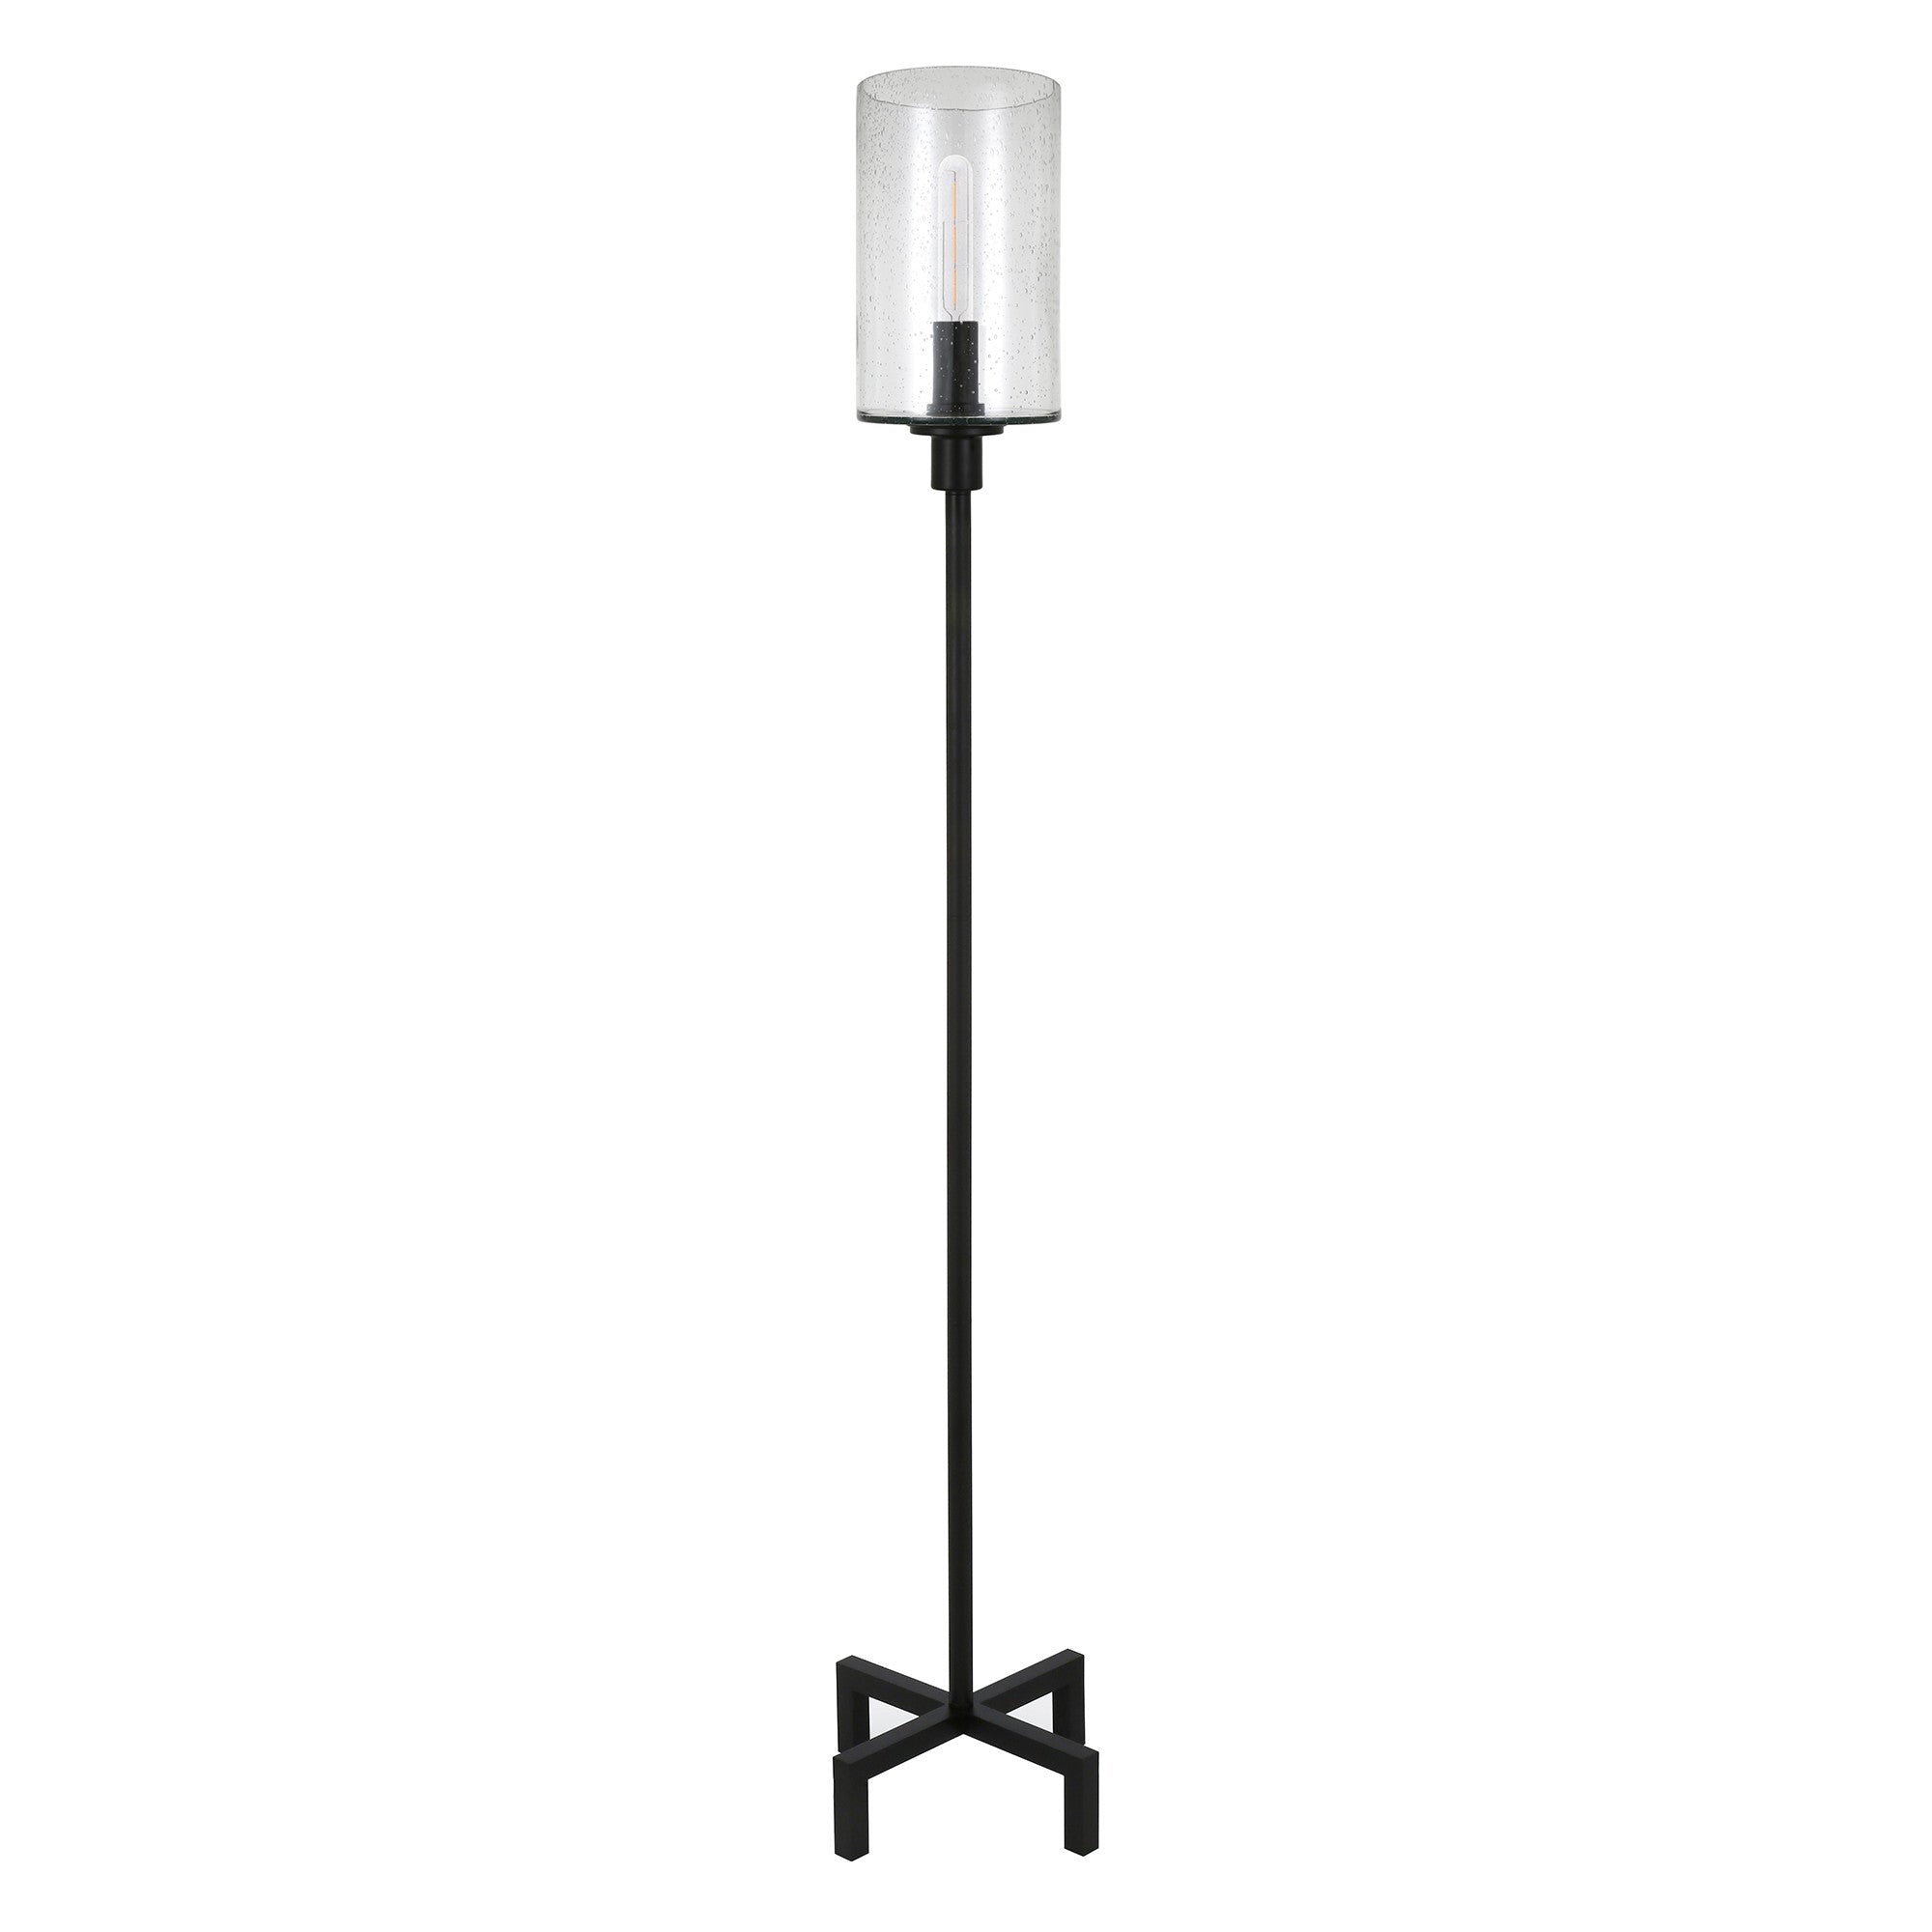 66" Black Torchiere Floor Lamp With Clear Seeded Glass Drum Shade